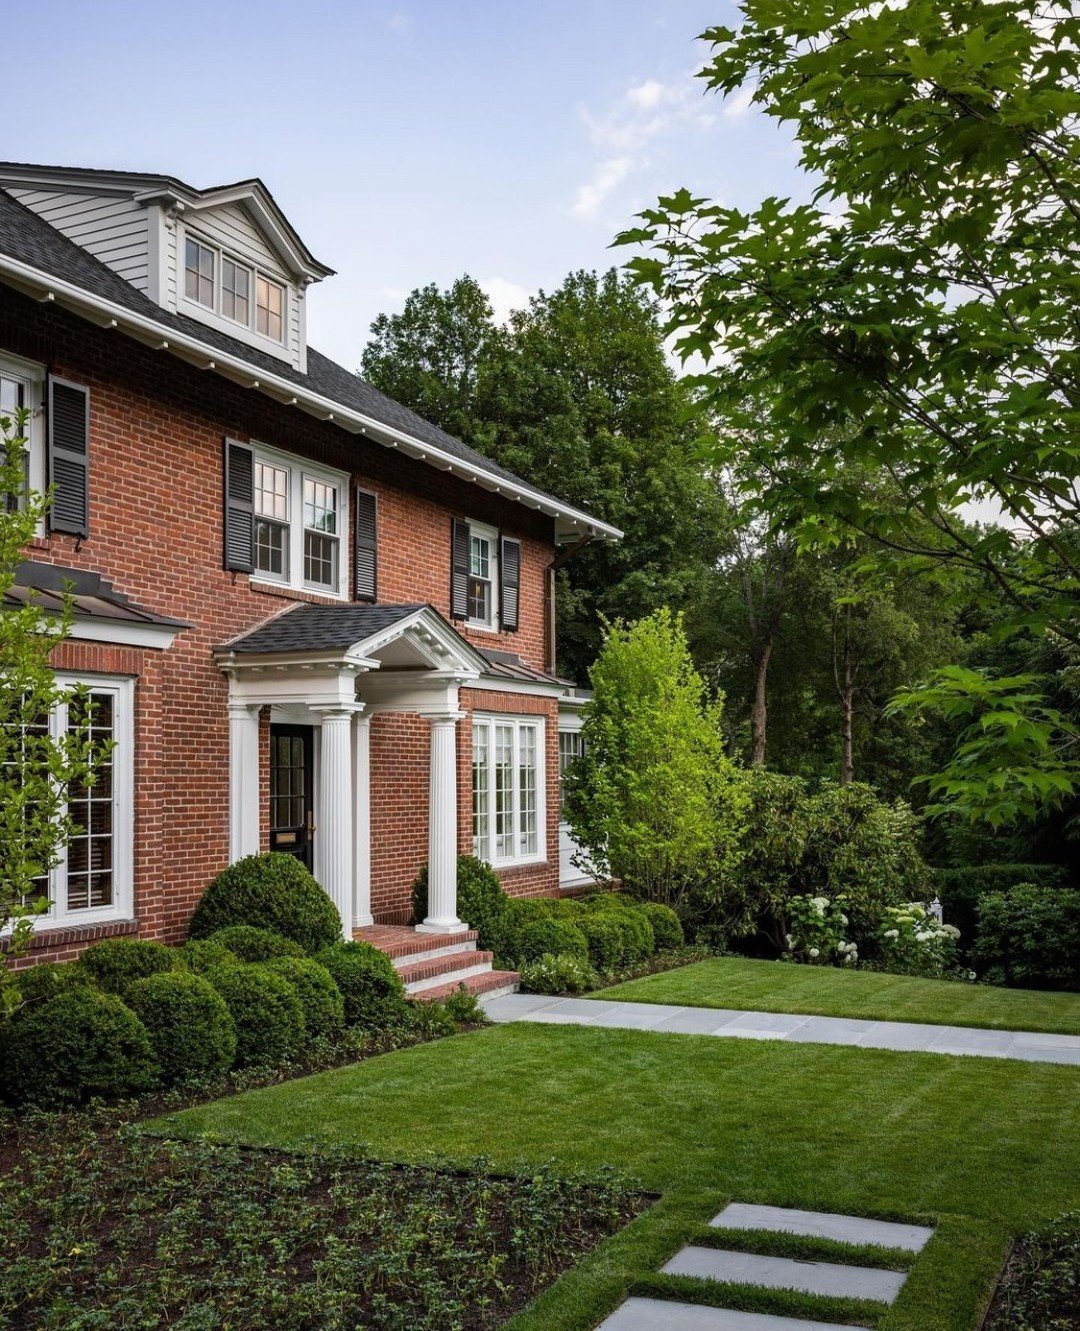 Sharing this repost from @crucinski_ of a stunning, suburban home in Wellesley, Massachusetts. Whether you've stepped inside the hedge-framed boundary lines or are viewing from the street, the level of detail and care to this classic, symmetrical and